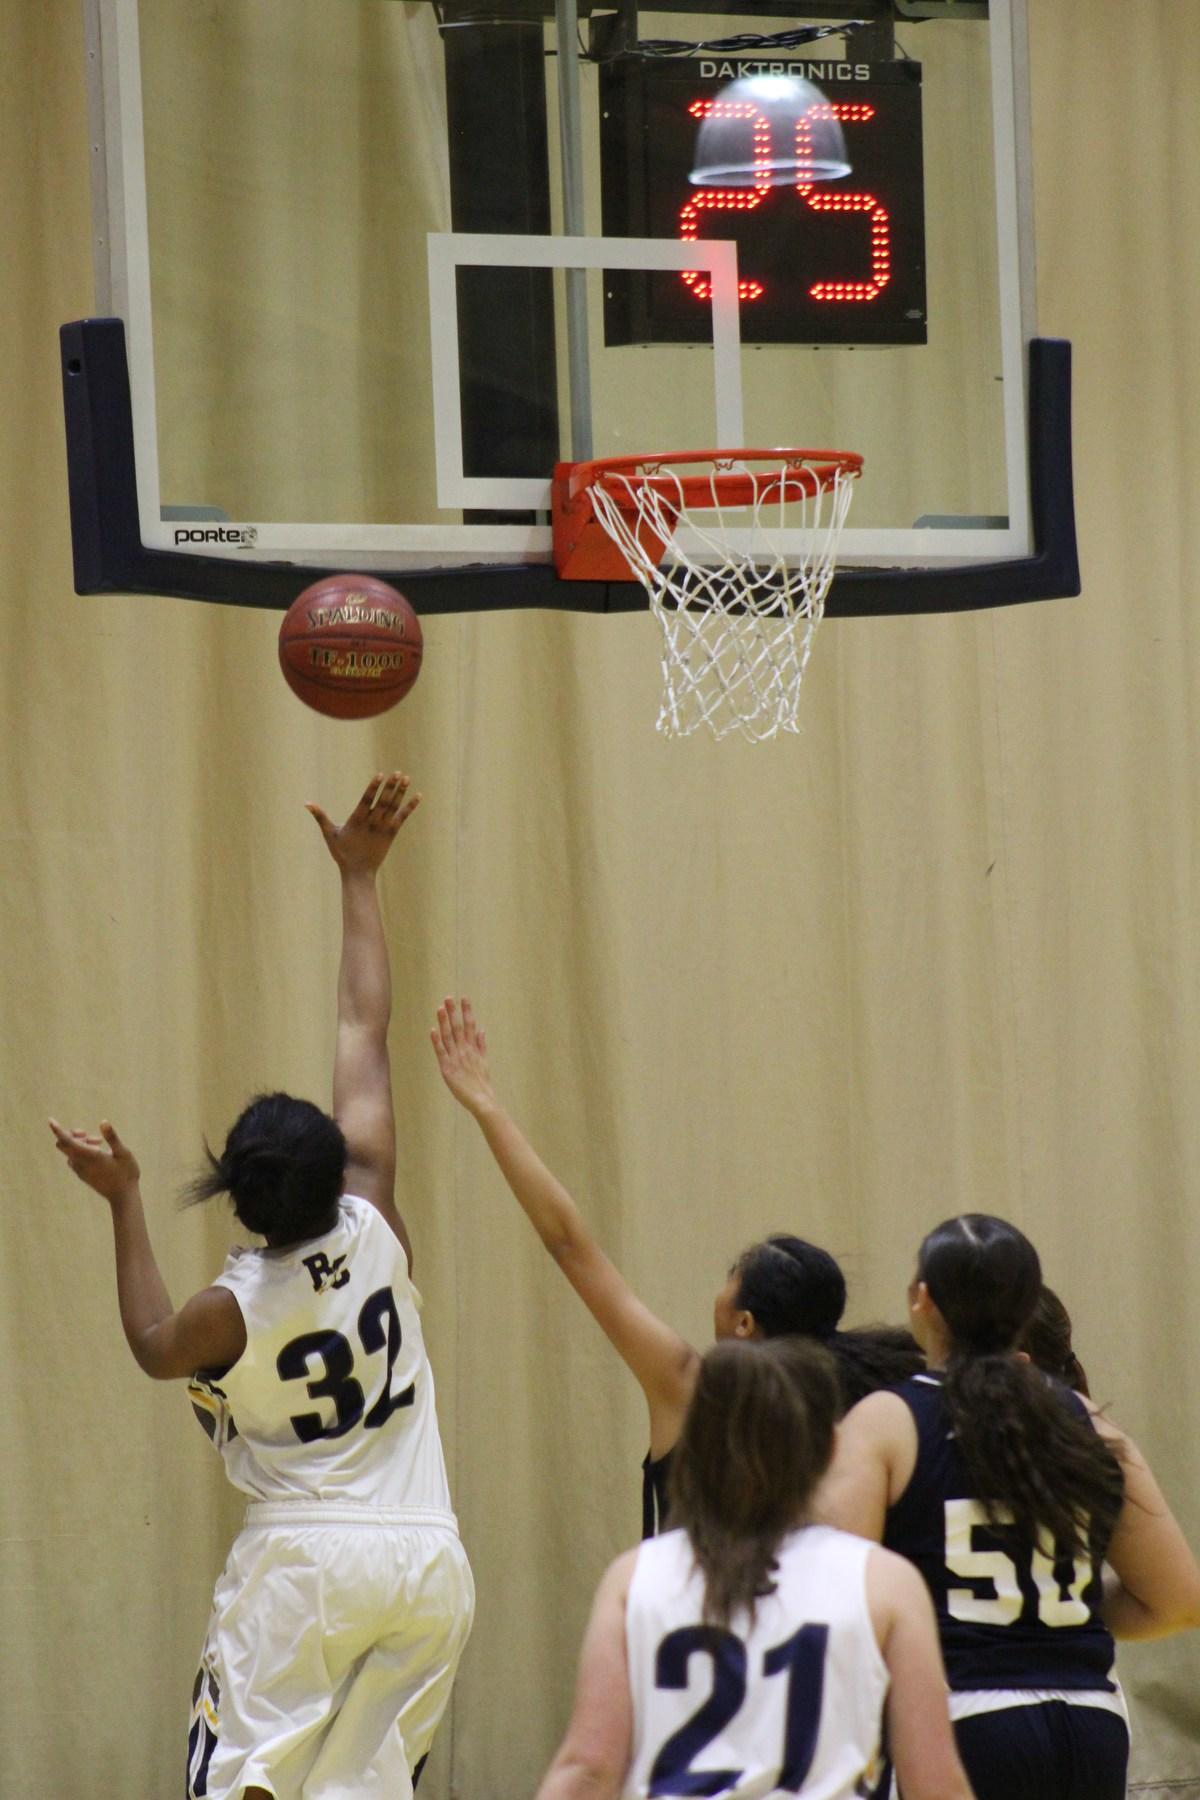 Basketball player shooting the ball while being guarded